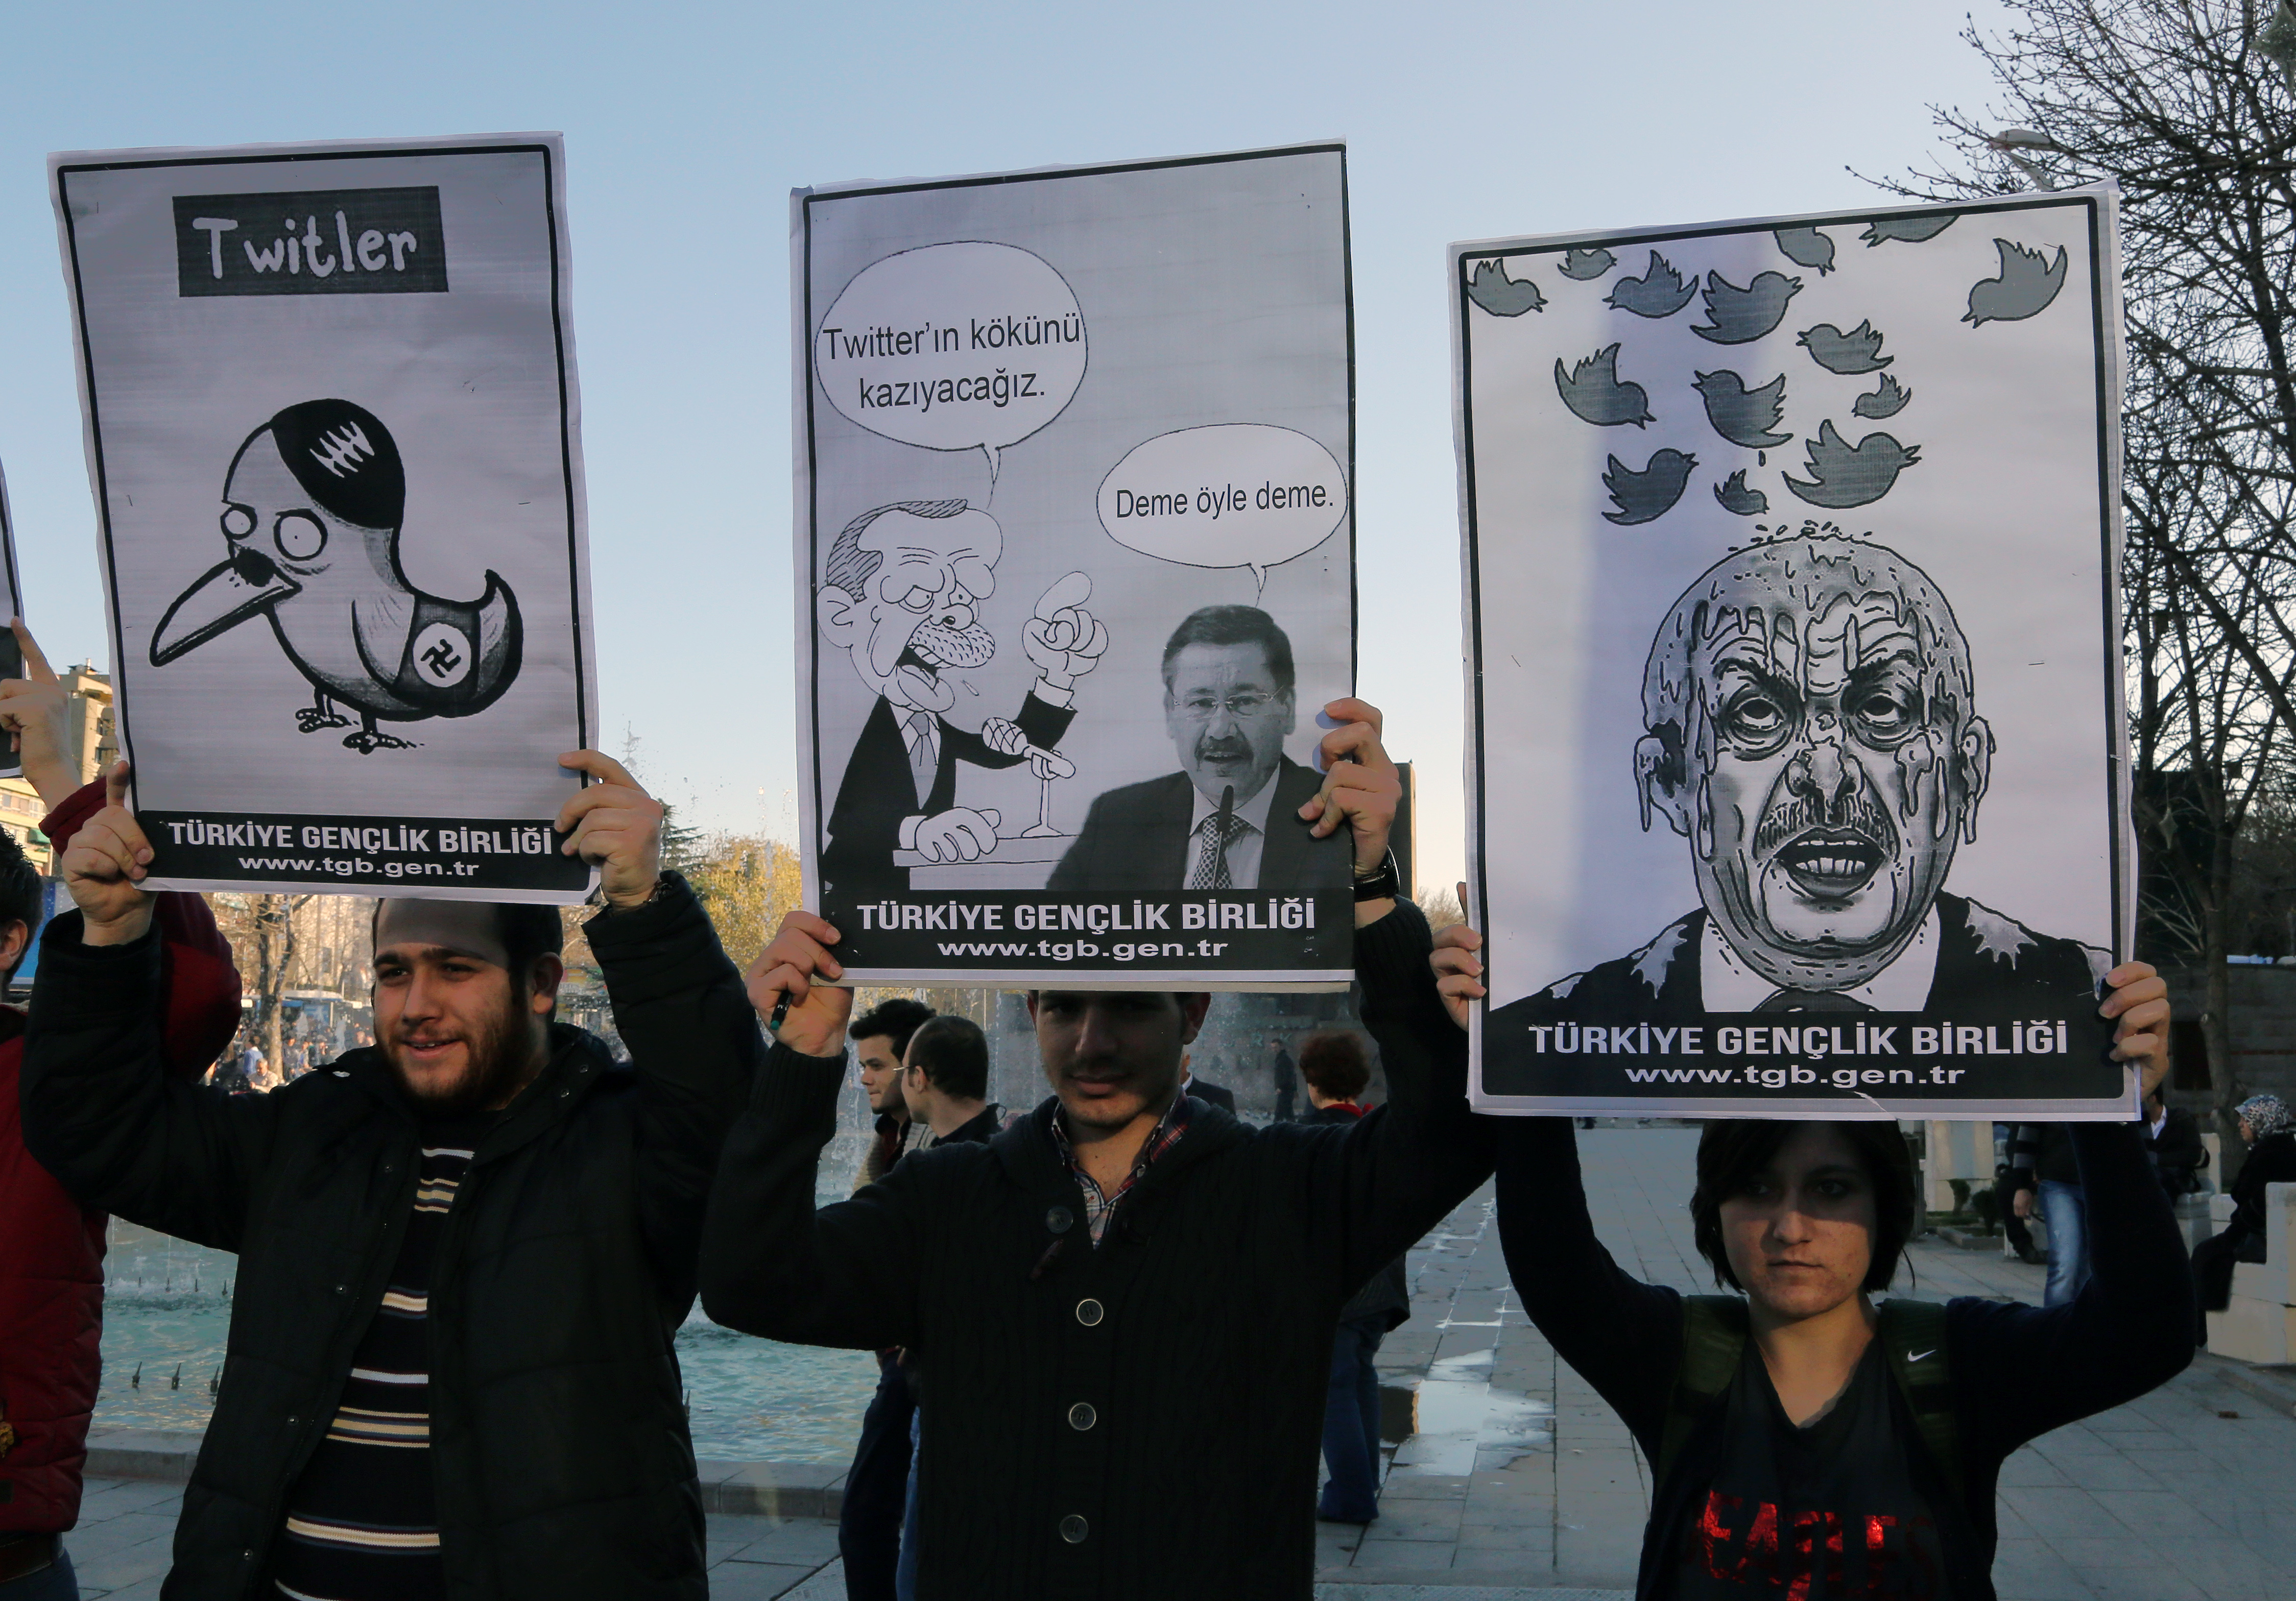 Members of the Turkish Youth Union hold cartoons depicting Turkey's Prime Minister Recep Tayyip Erdogan during a protest against a ban on Twitter, in Ankara, 21 March 2014.